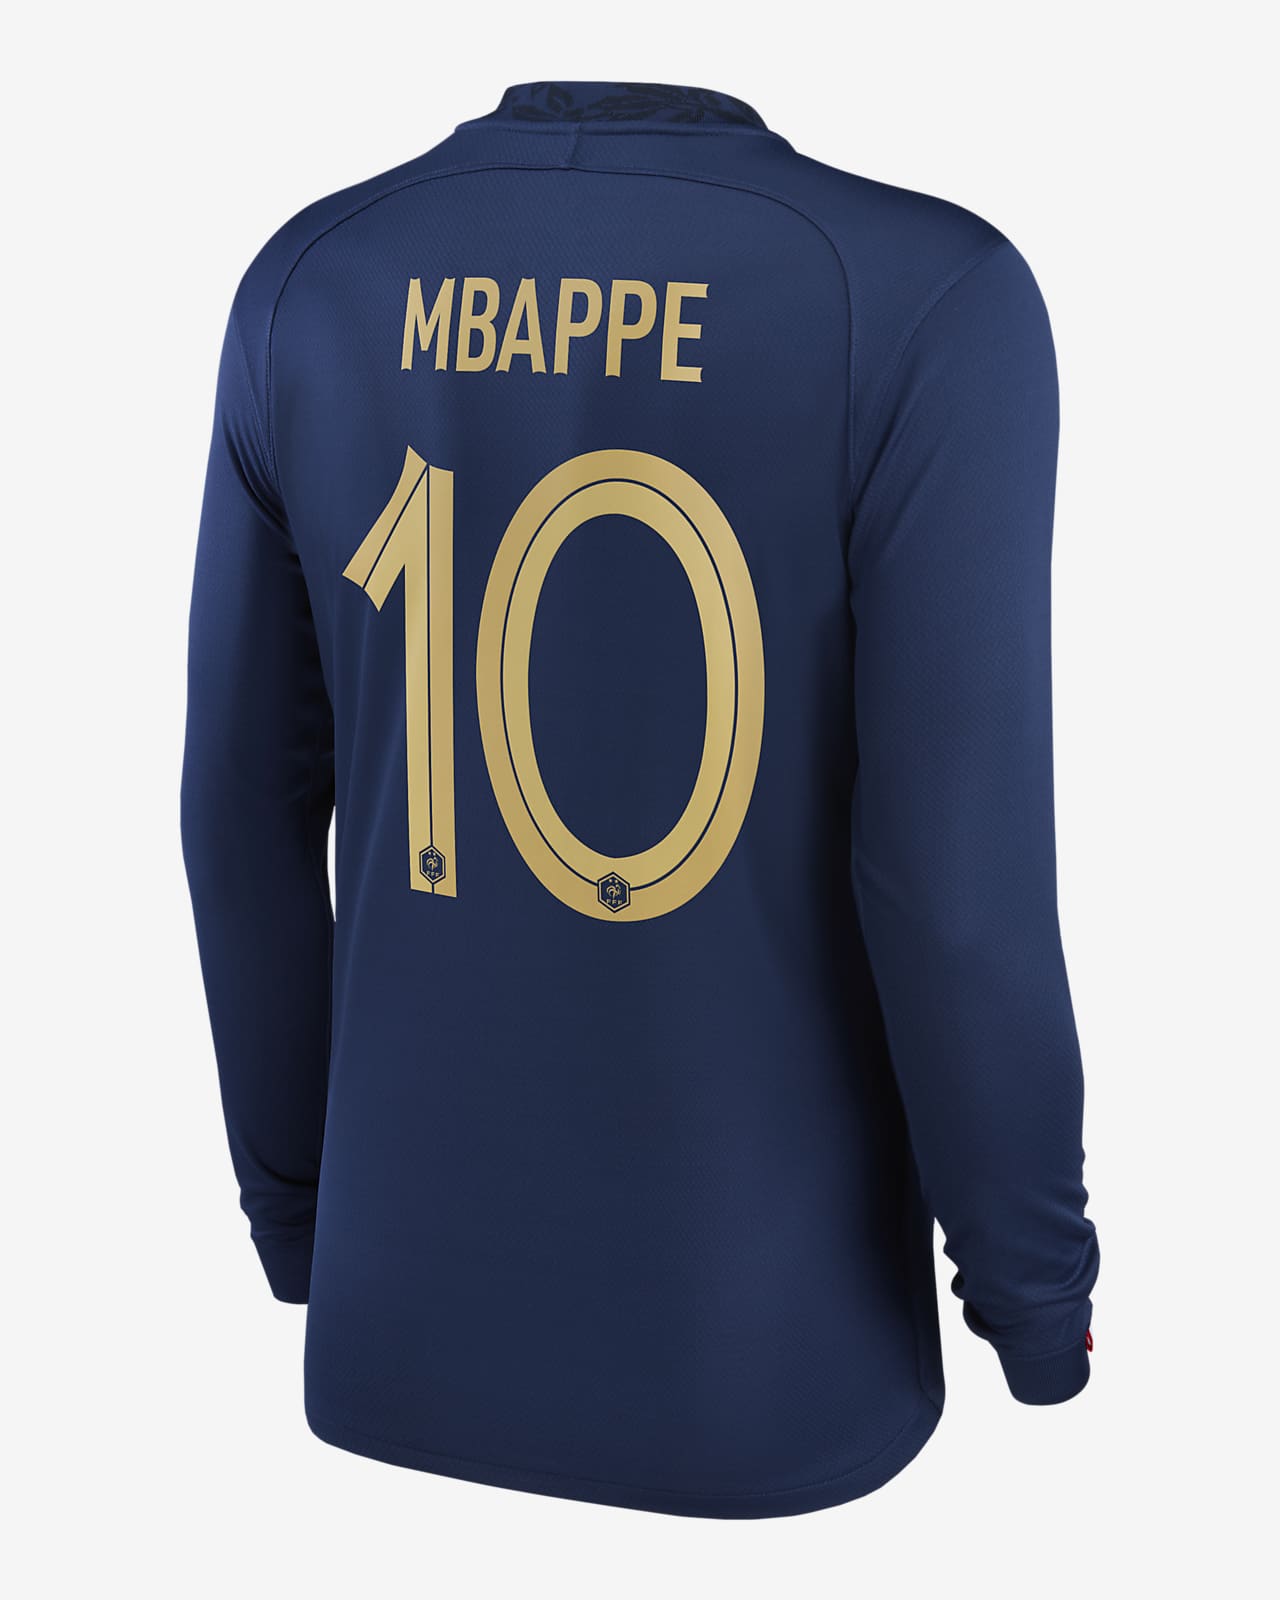 Mbappe T-Shirts for Sale